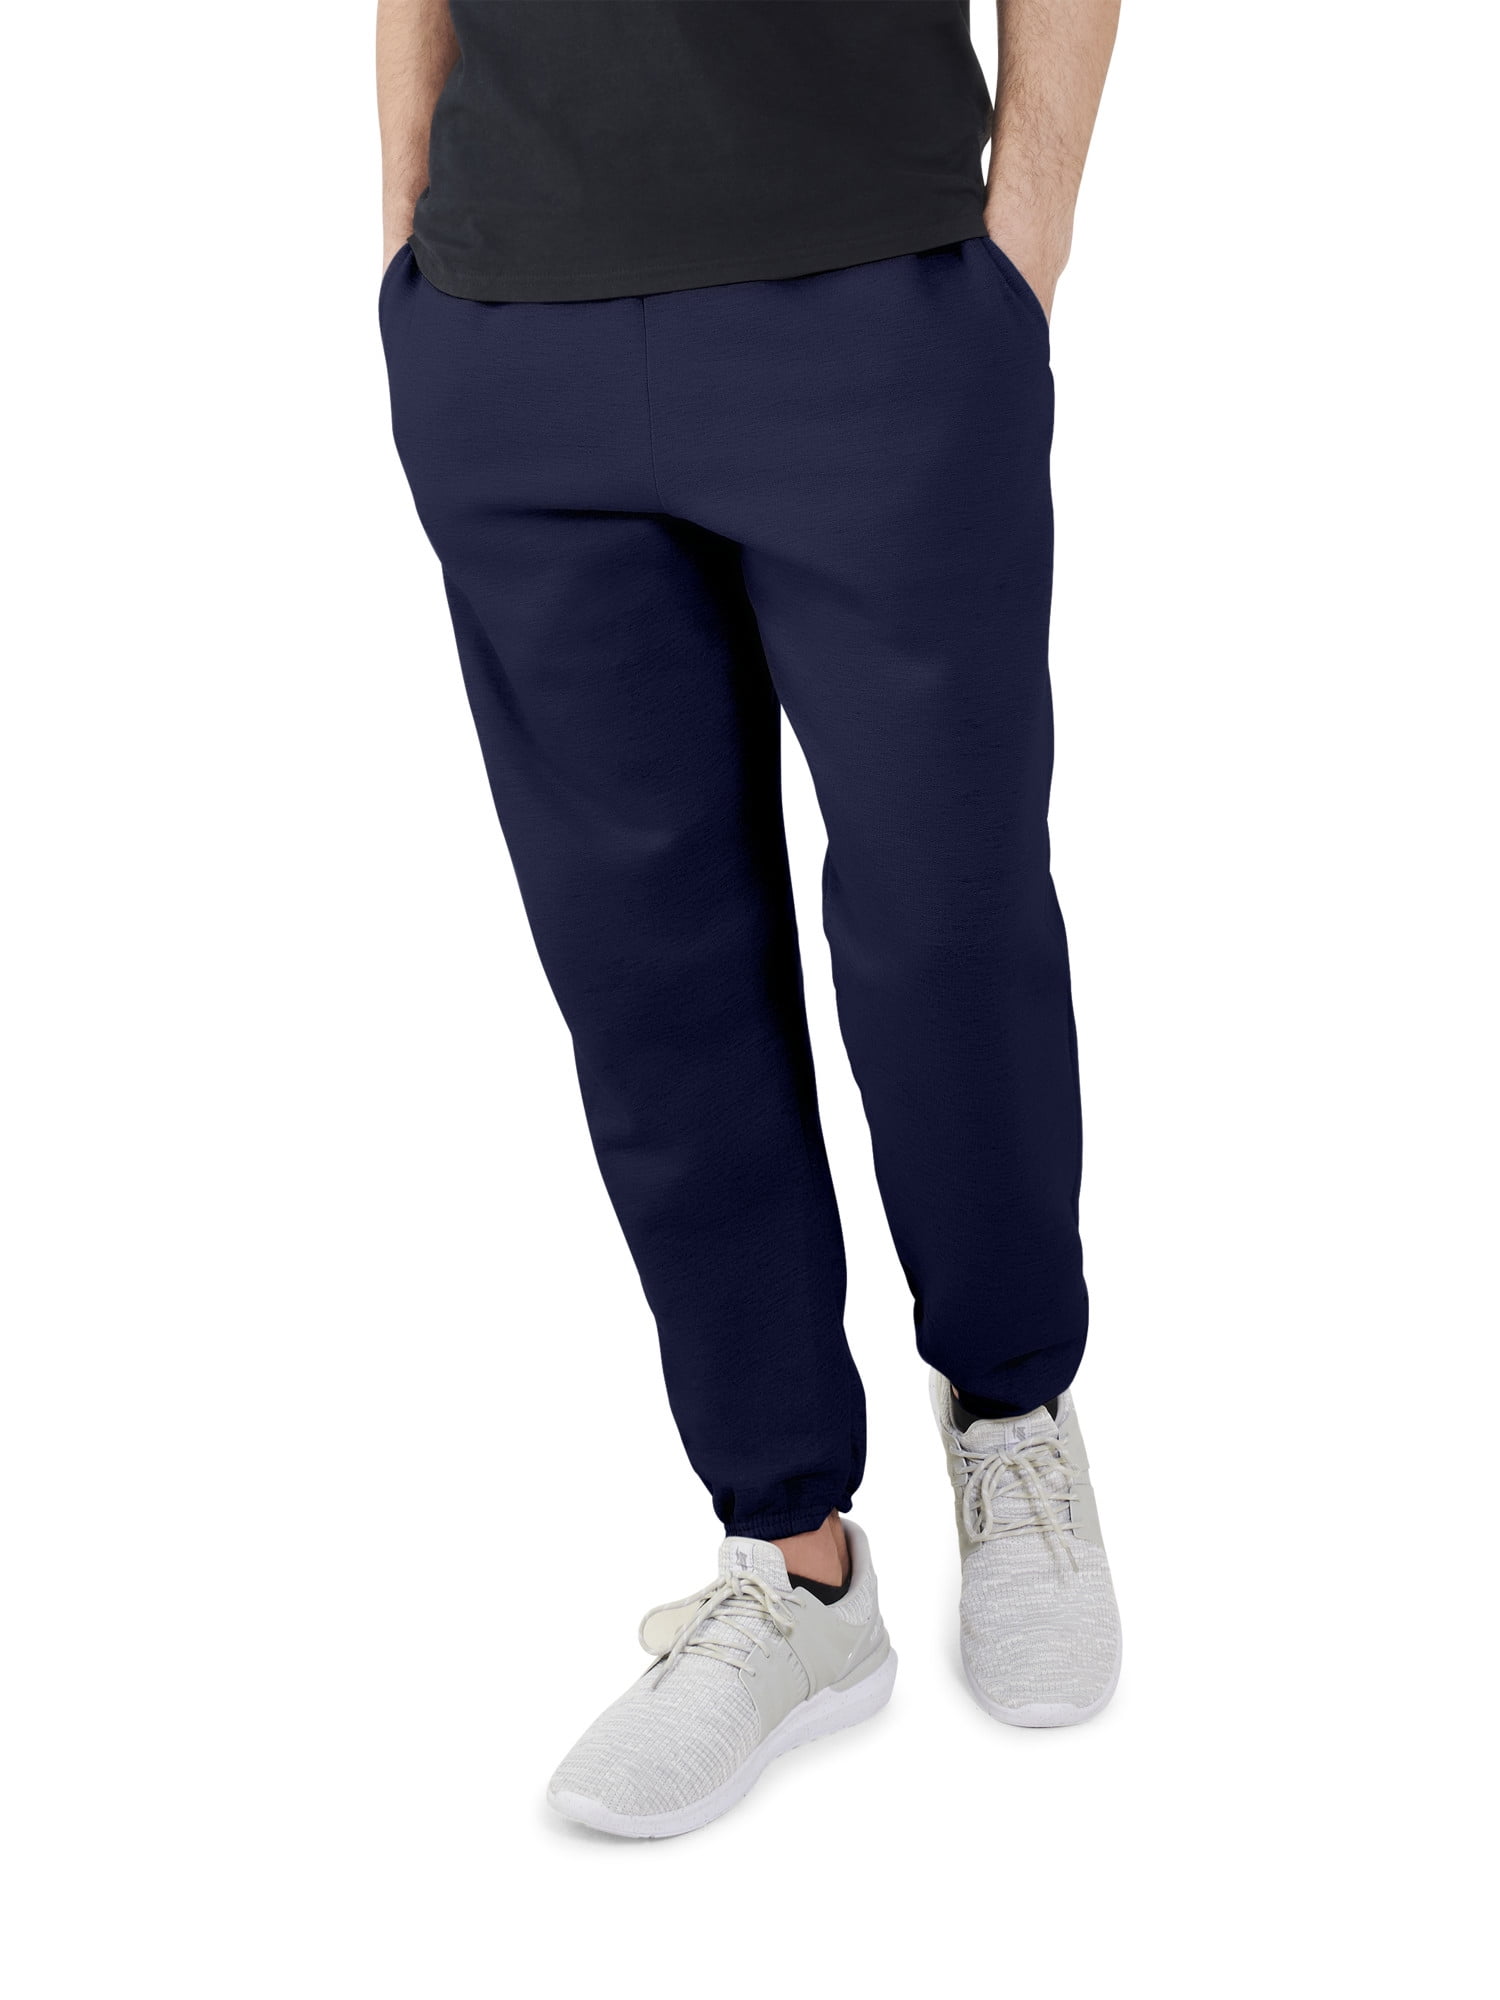 Fruit of the Loom Men's Double-Knit Commuter Joggers